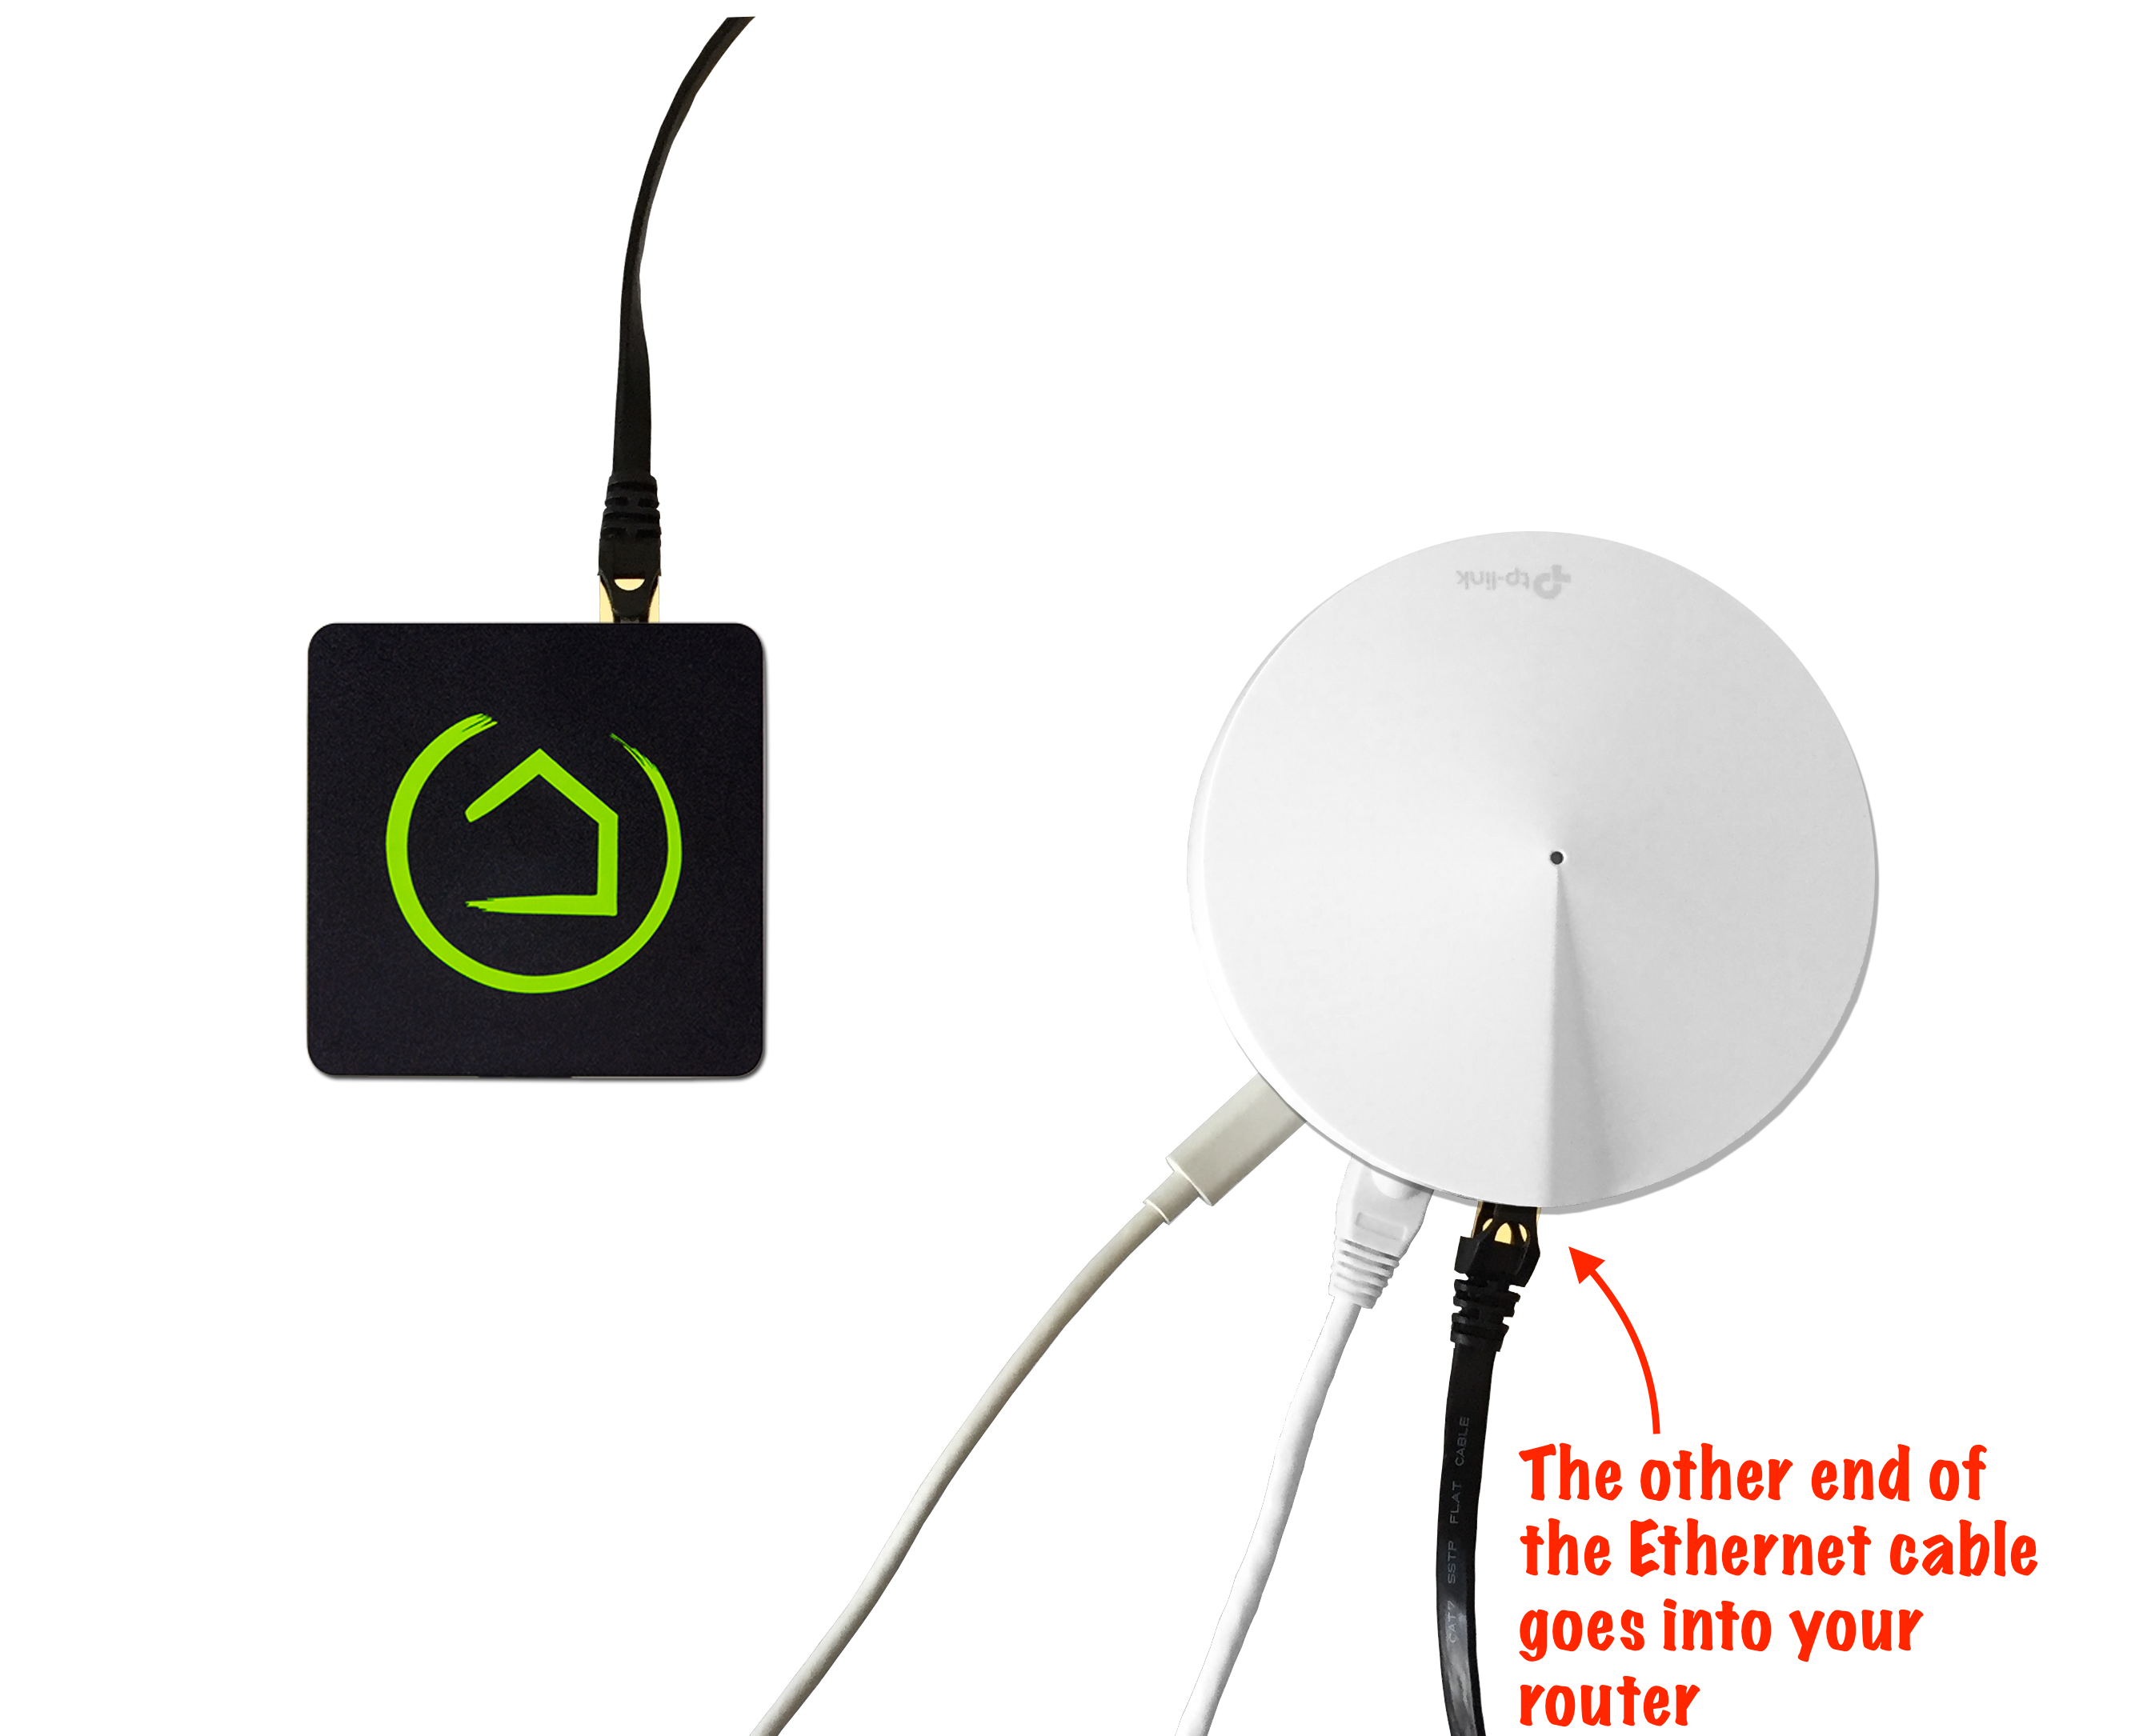 Install the opposite end of the Ethernet cable into an available Local Area Network port of your router